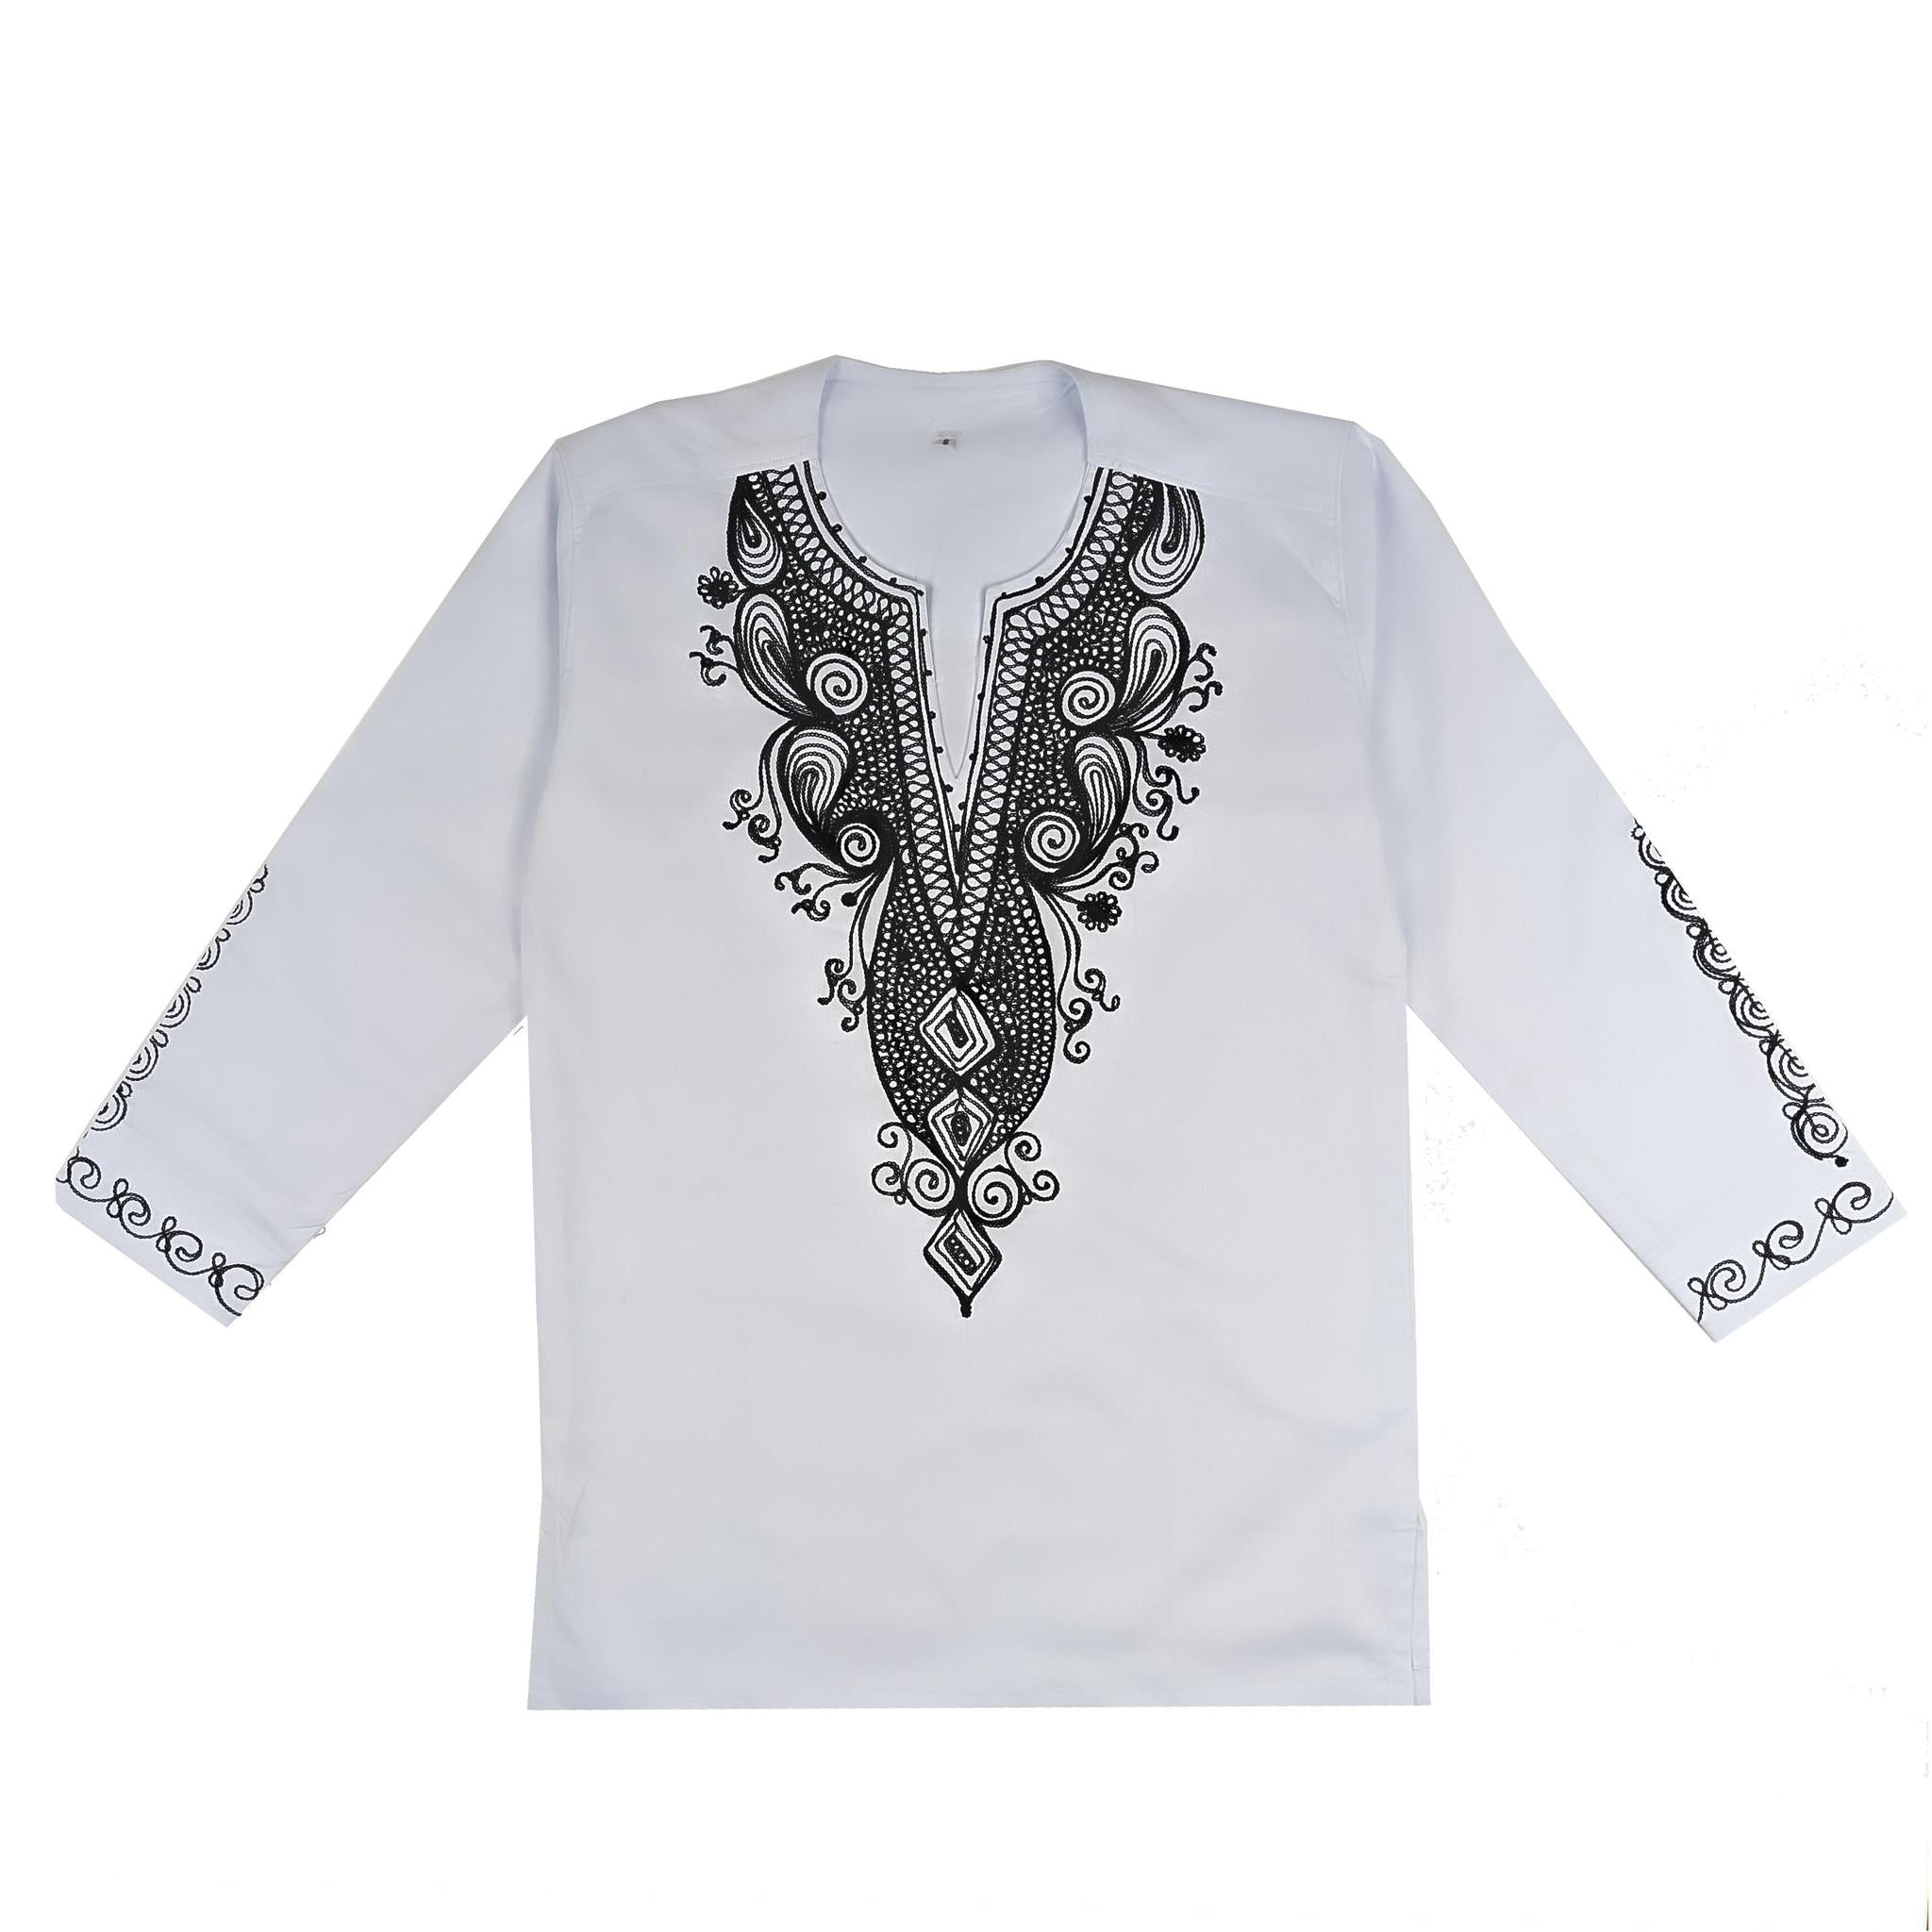 Men's White And Black Embroidery Top